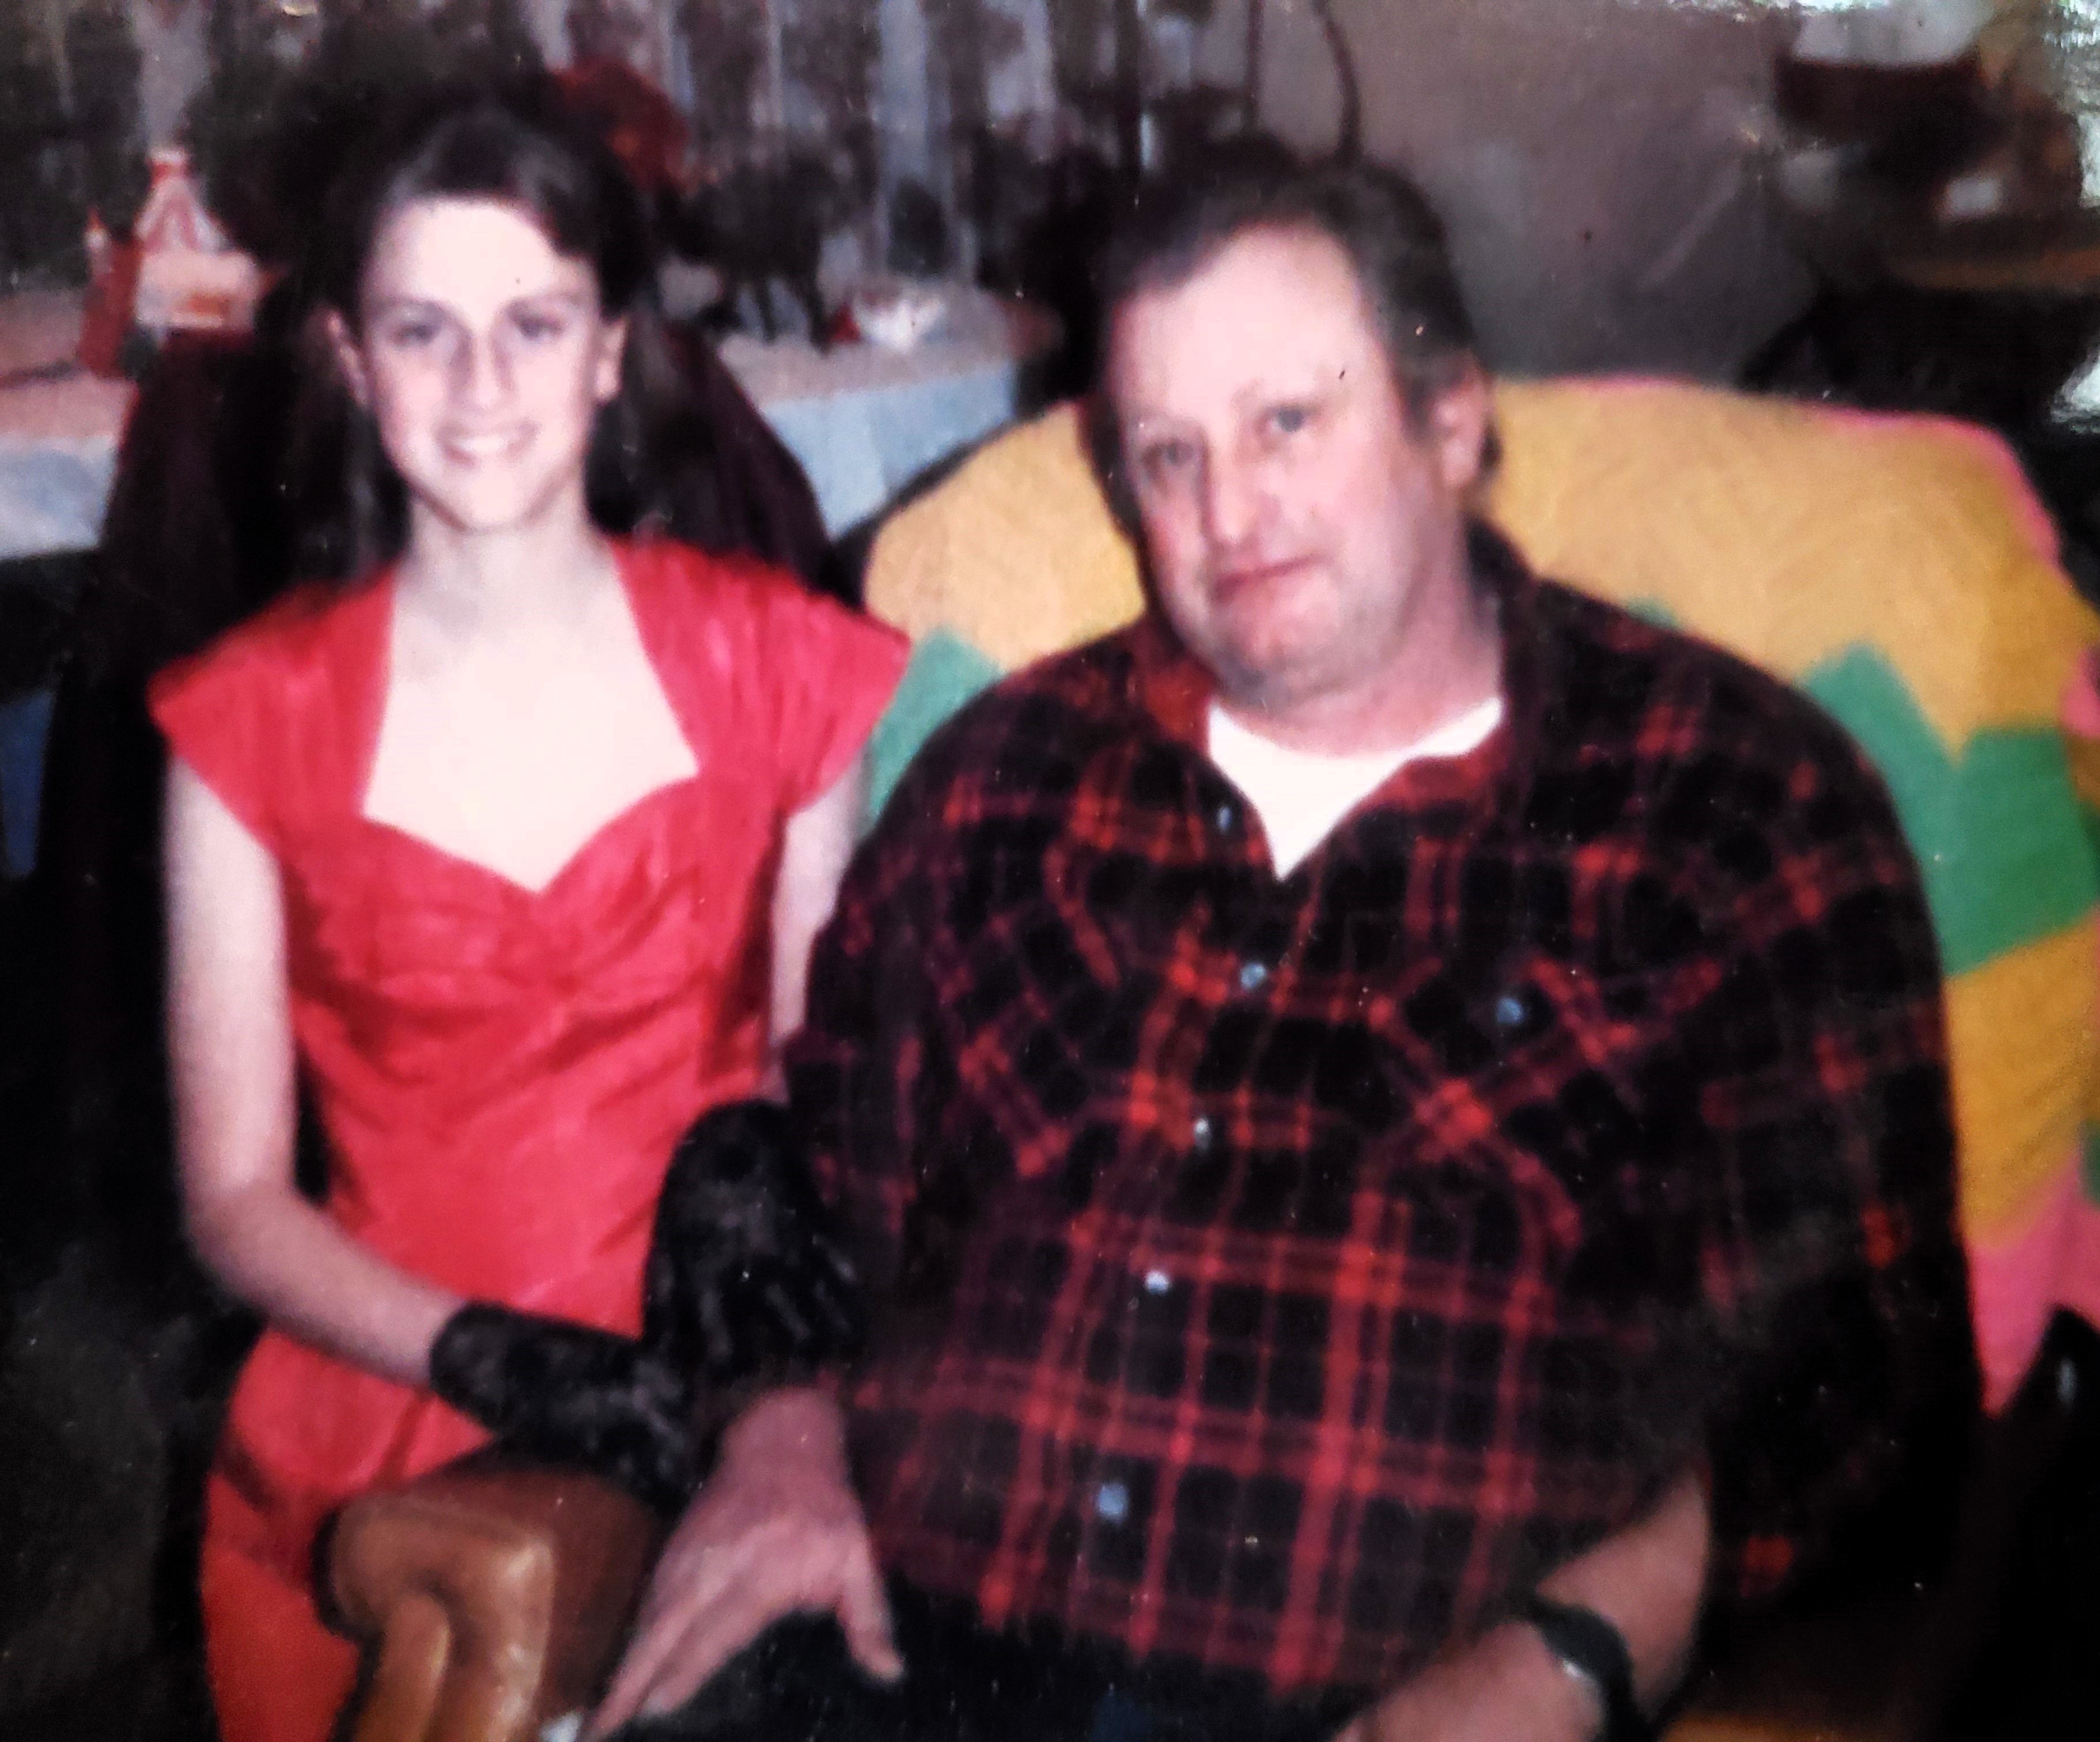 a teenager in a formal red dress and black gloves sits next to a man wearing a red and plaid flannel shirt